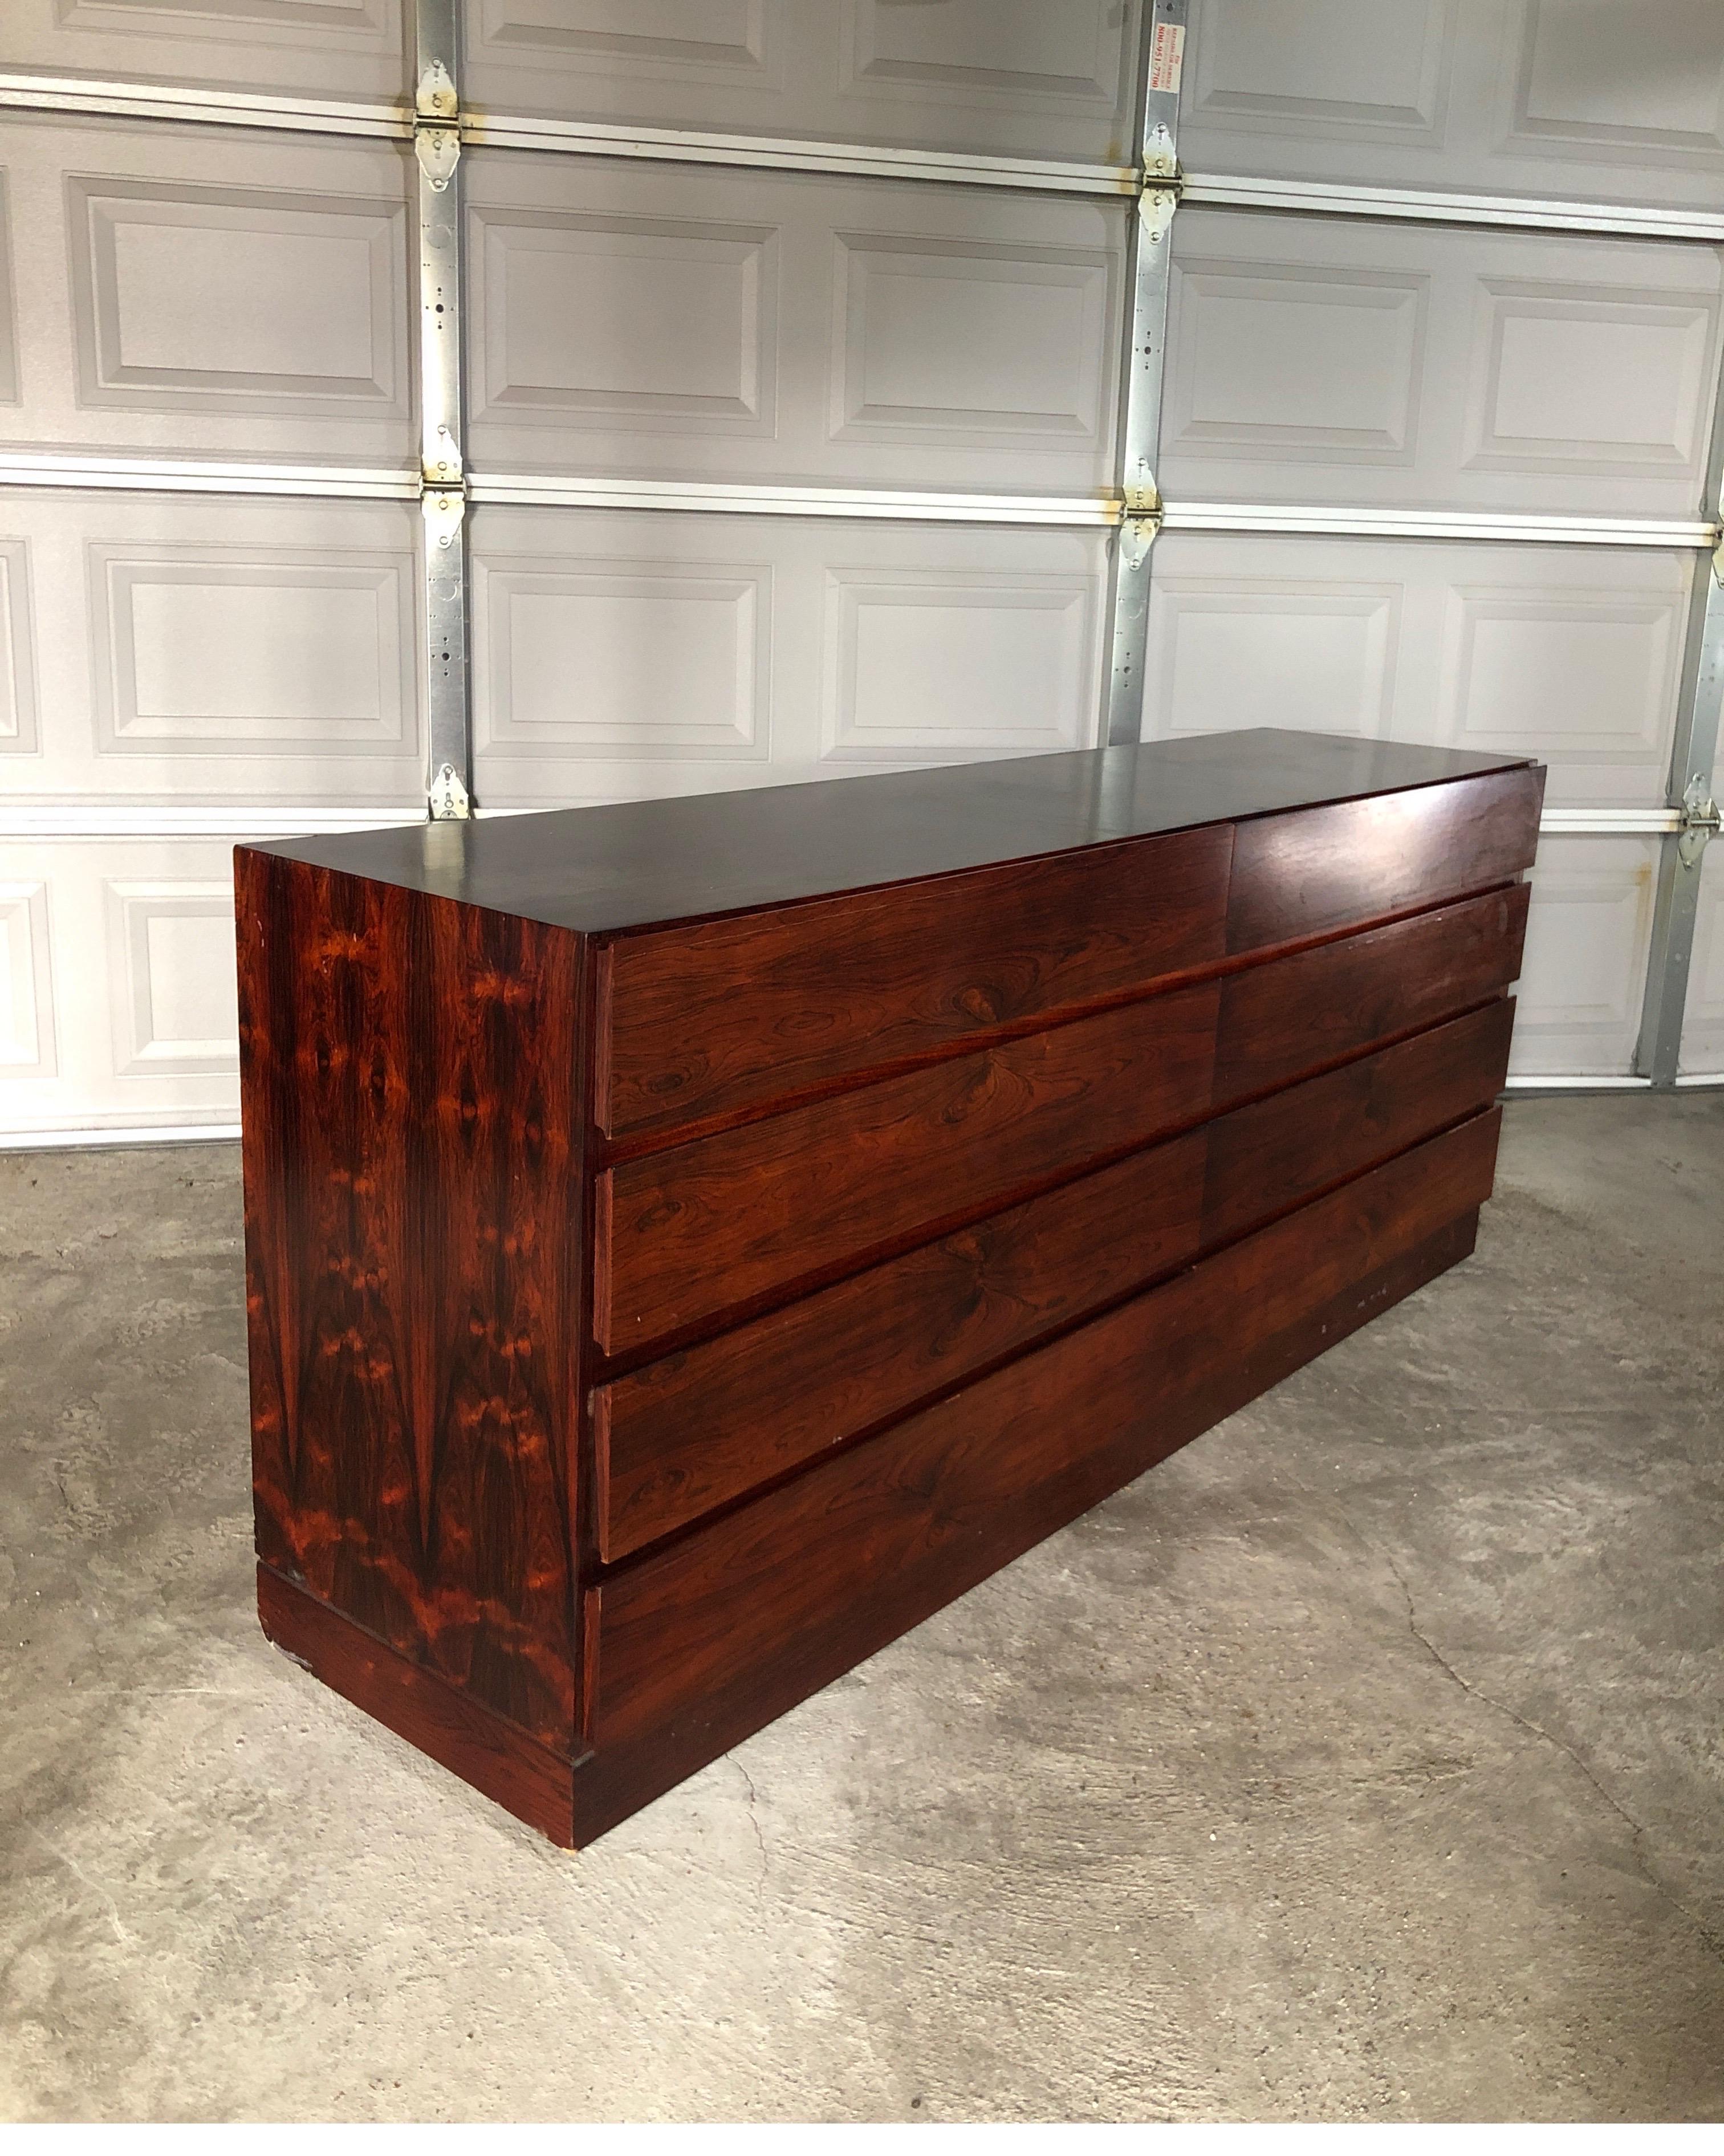 Elegant modern dresser designed and manufactured in Denmark in the 1960s.
Minimalist design with exotic and striking rosewood.
8 wide drawers with exquisite deep dark wood contrasting with light.
Dresser does show some signs of age and the top